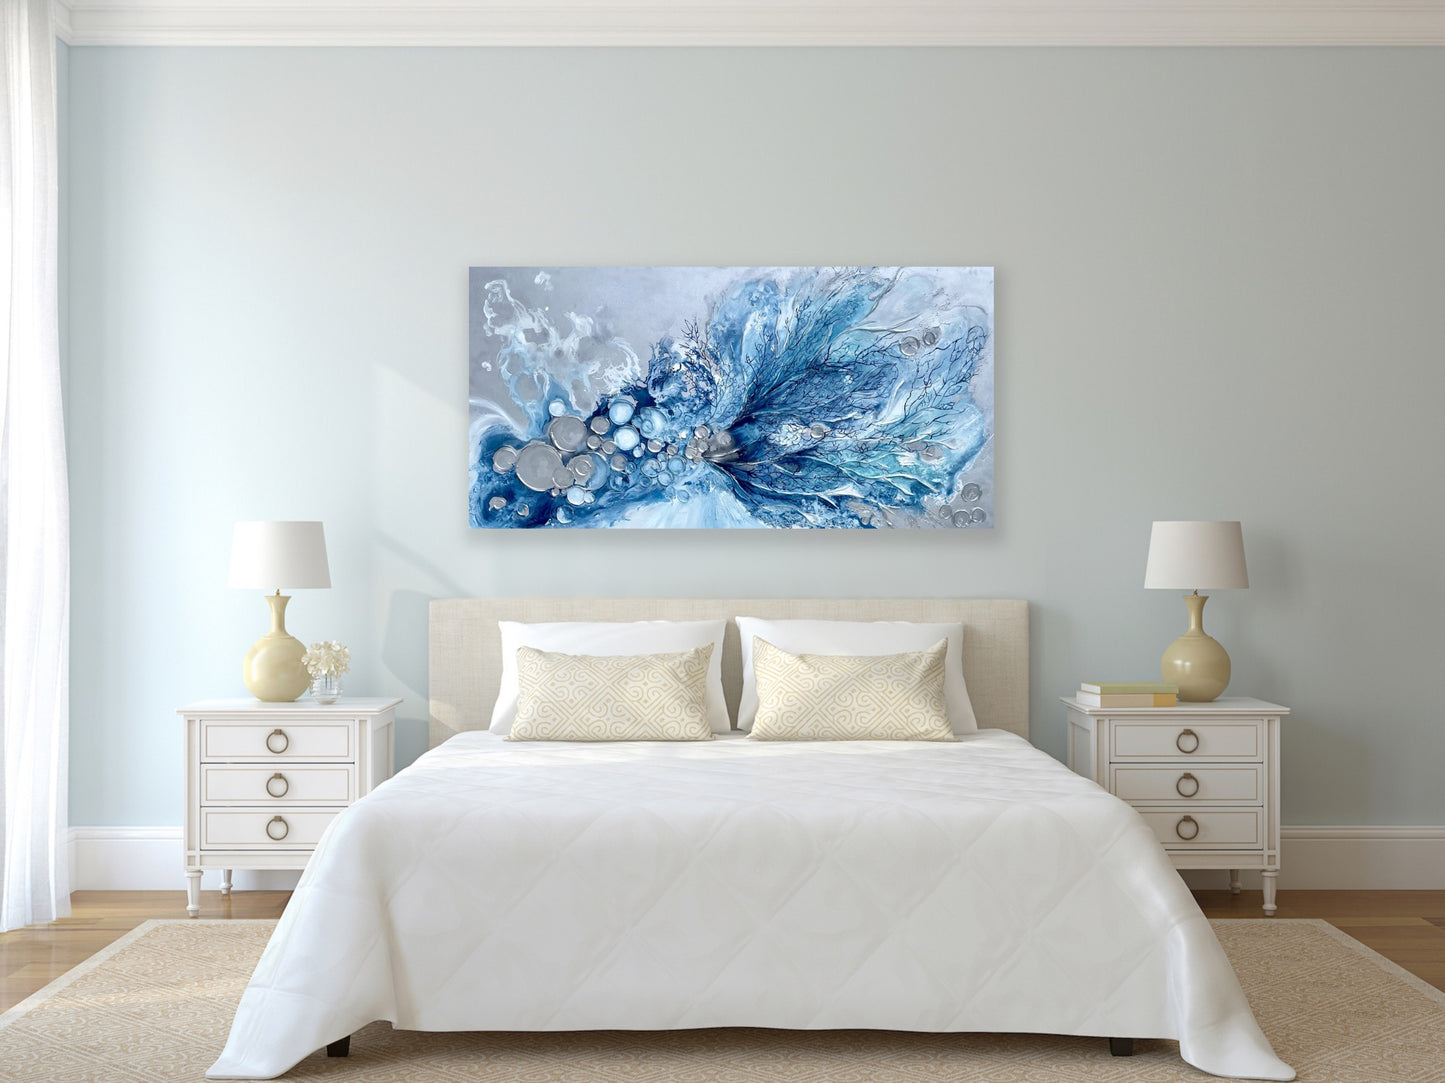 Silver and Blue Barnacles and Corals Painting 36x72 inches